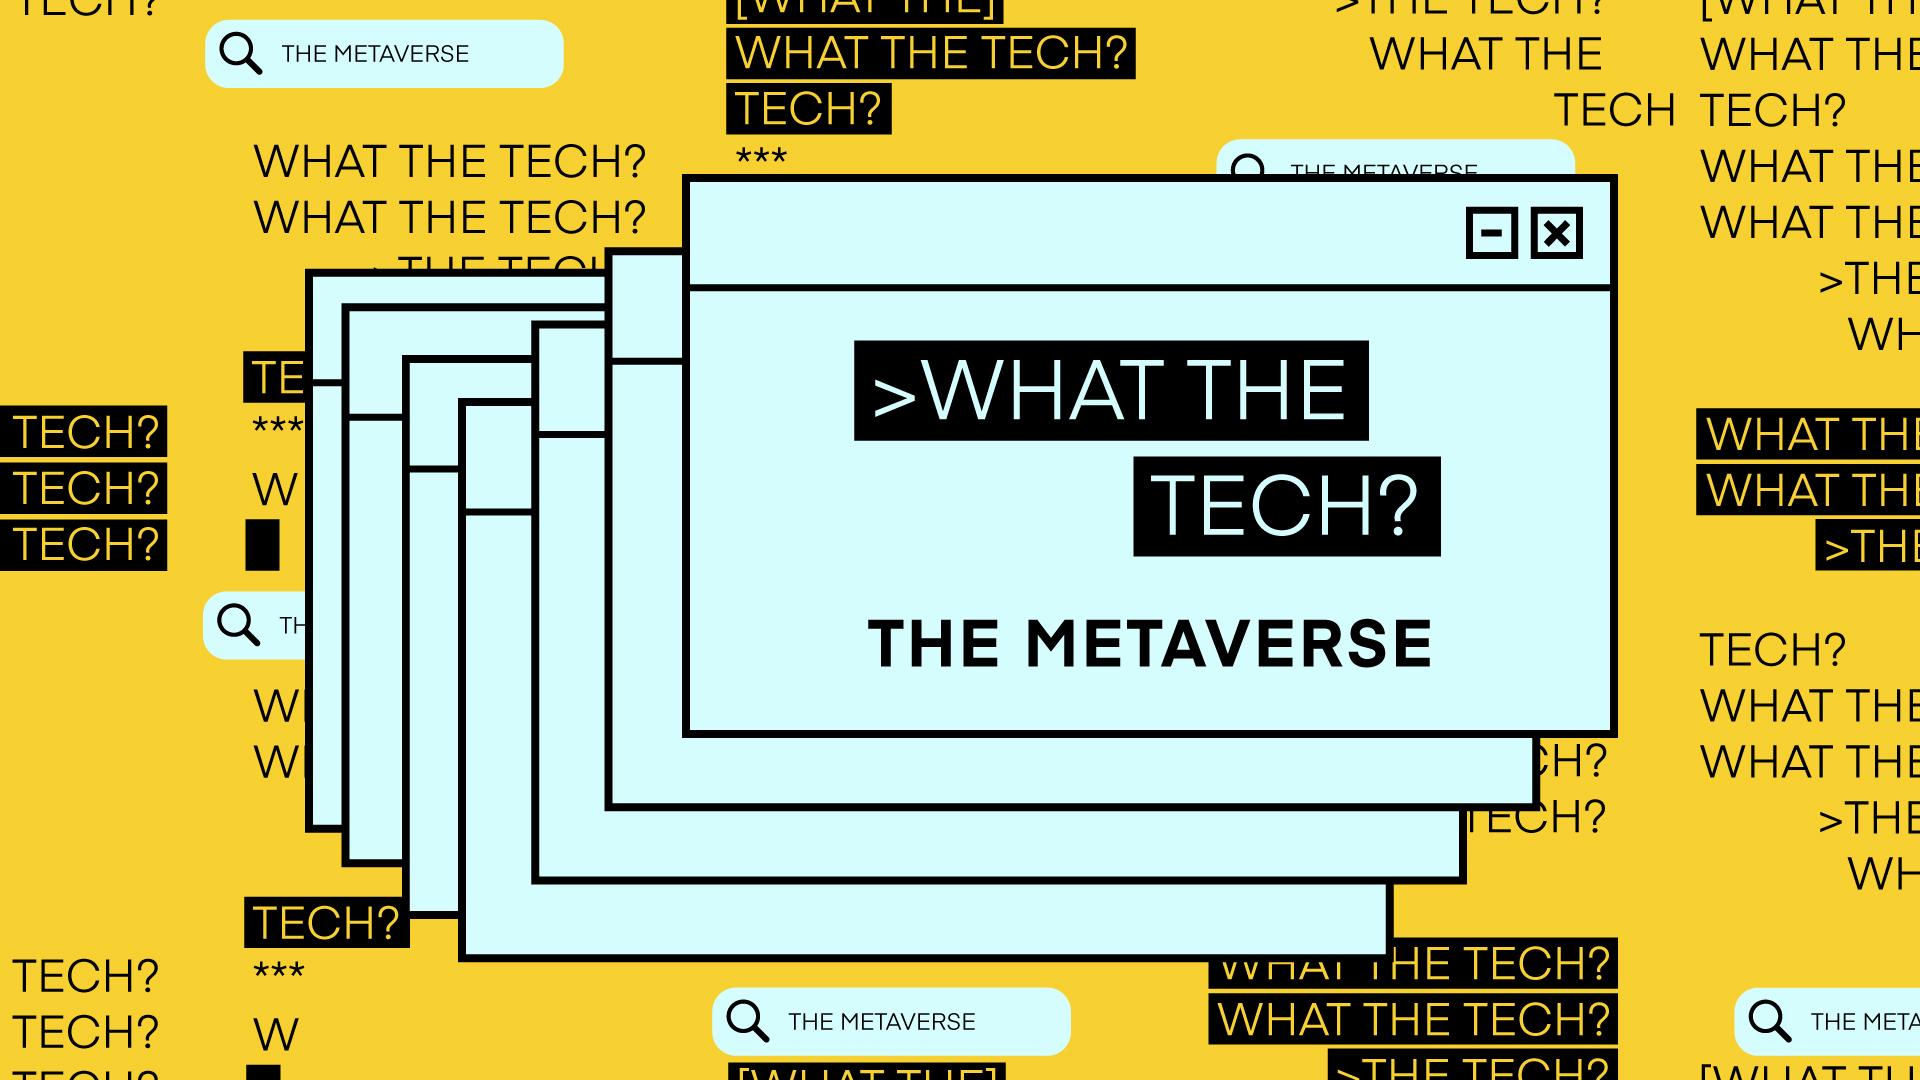 What the Tech is the metaverse?